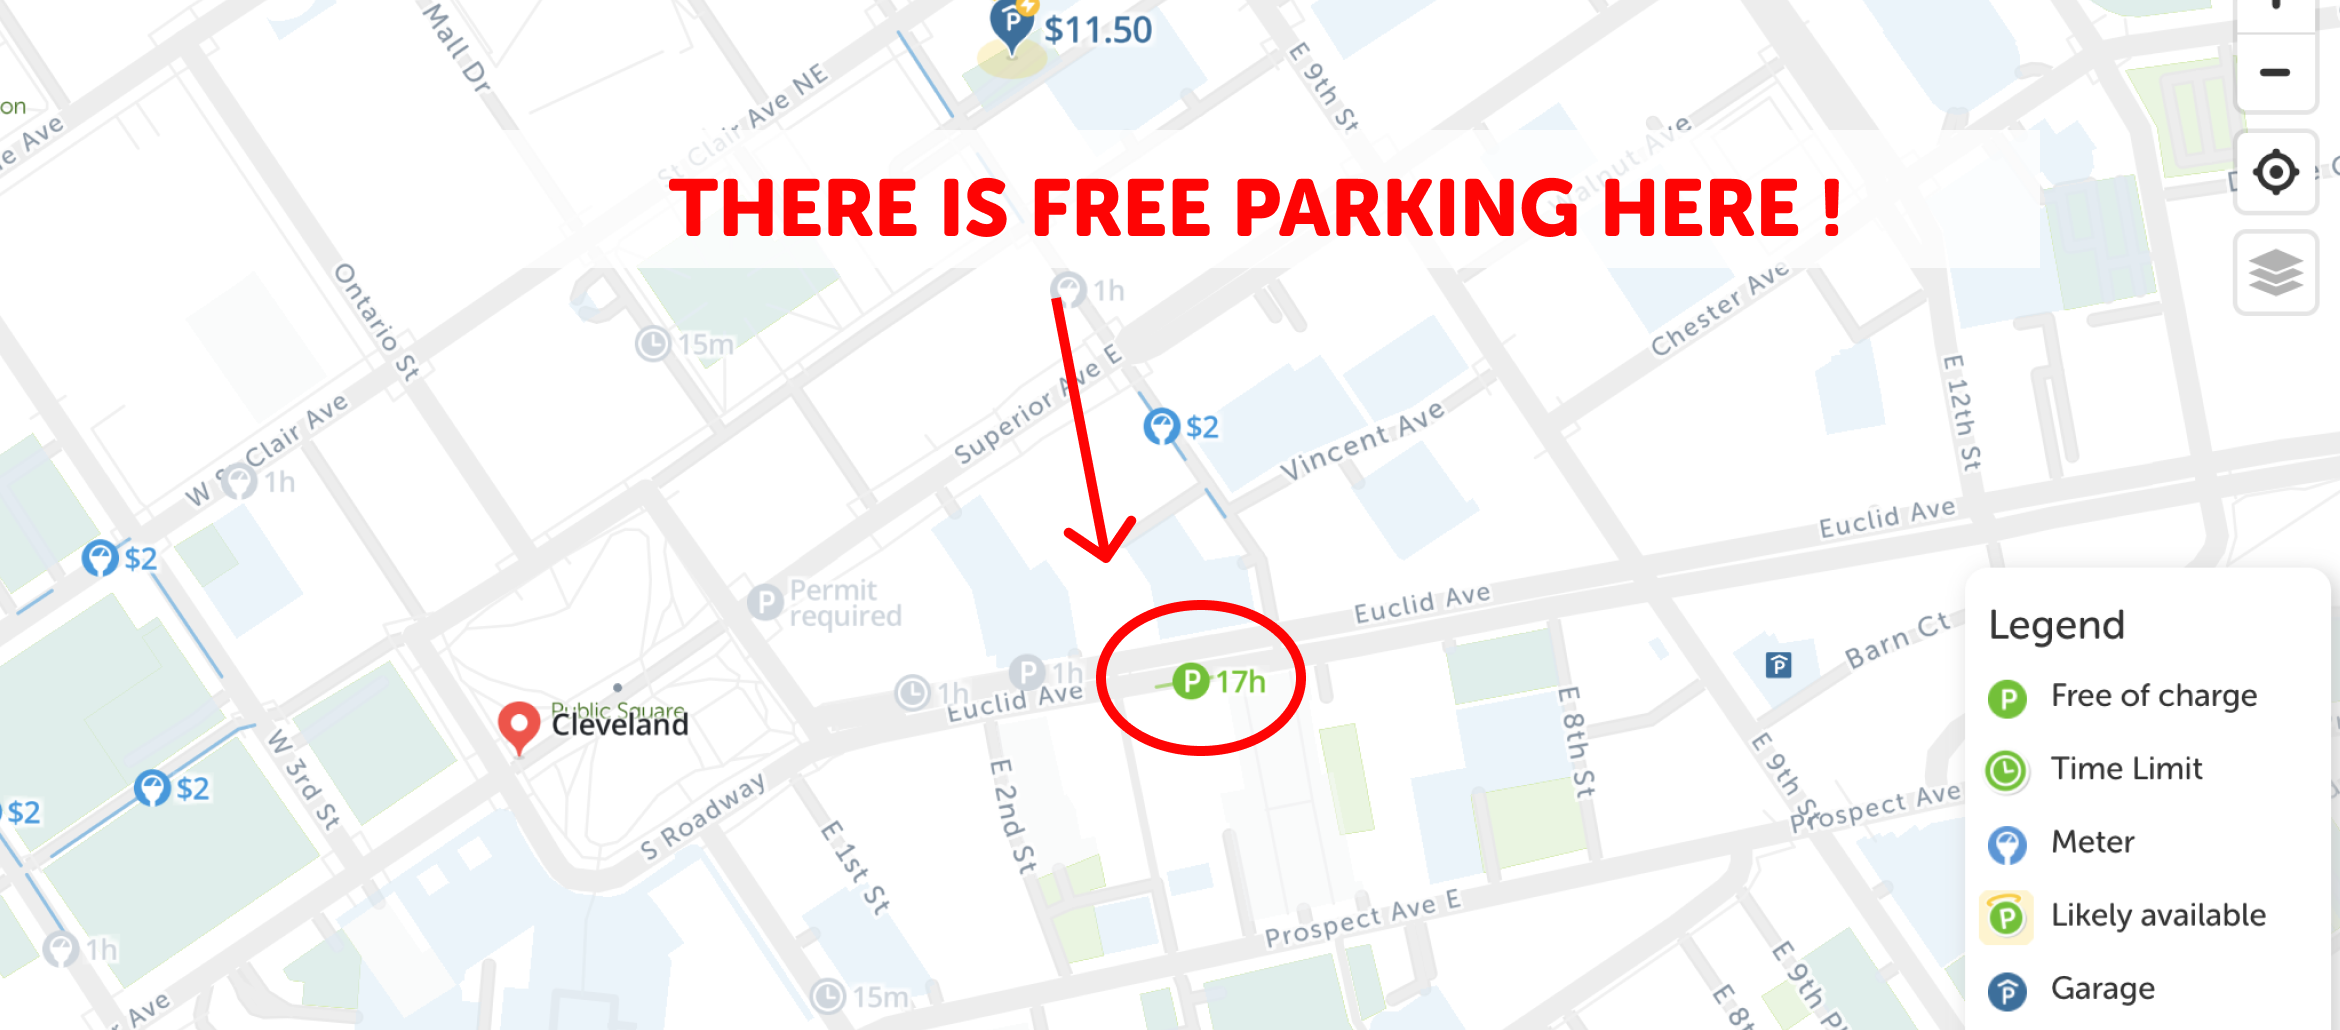 map of free parking in Cleveland - SpotAngels